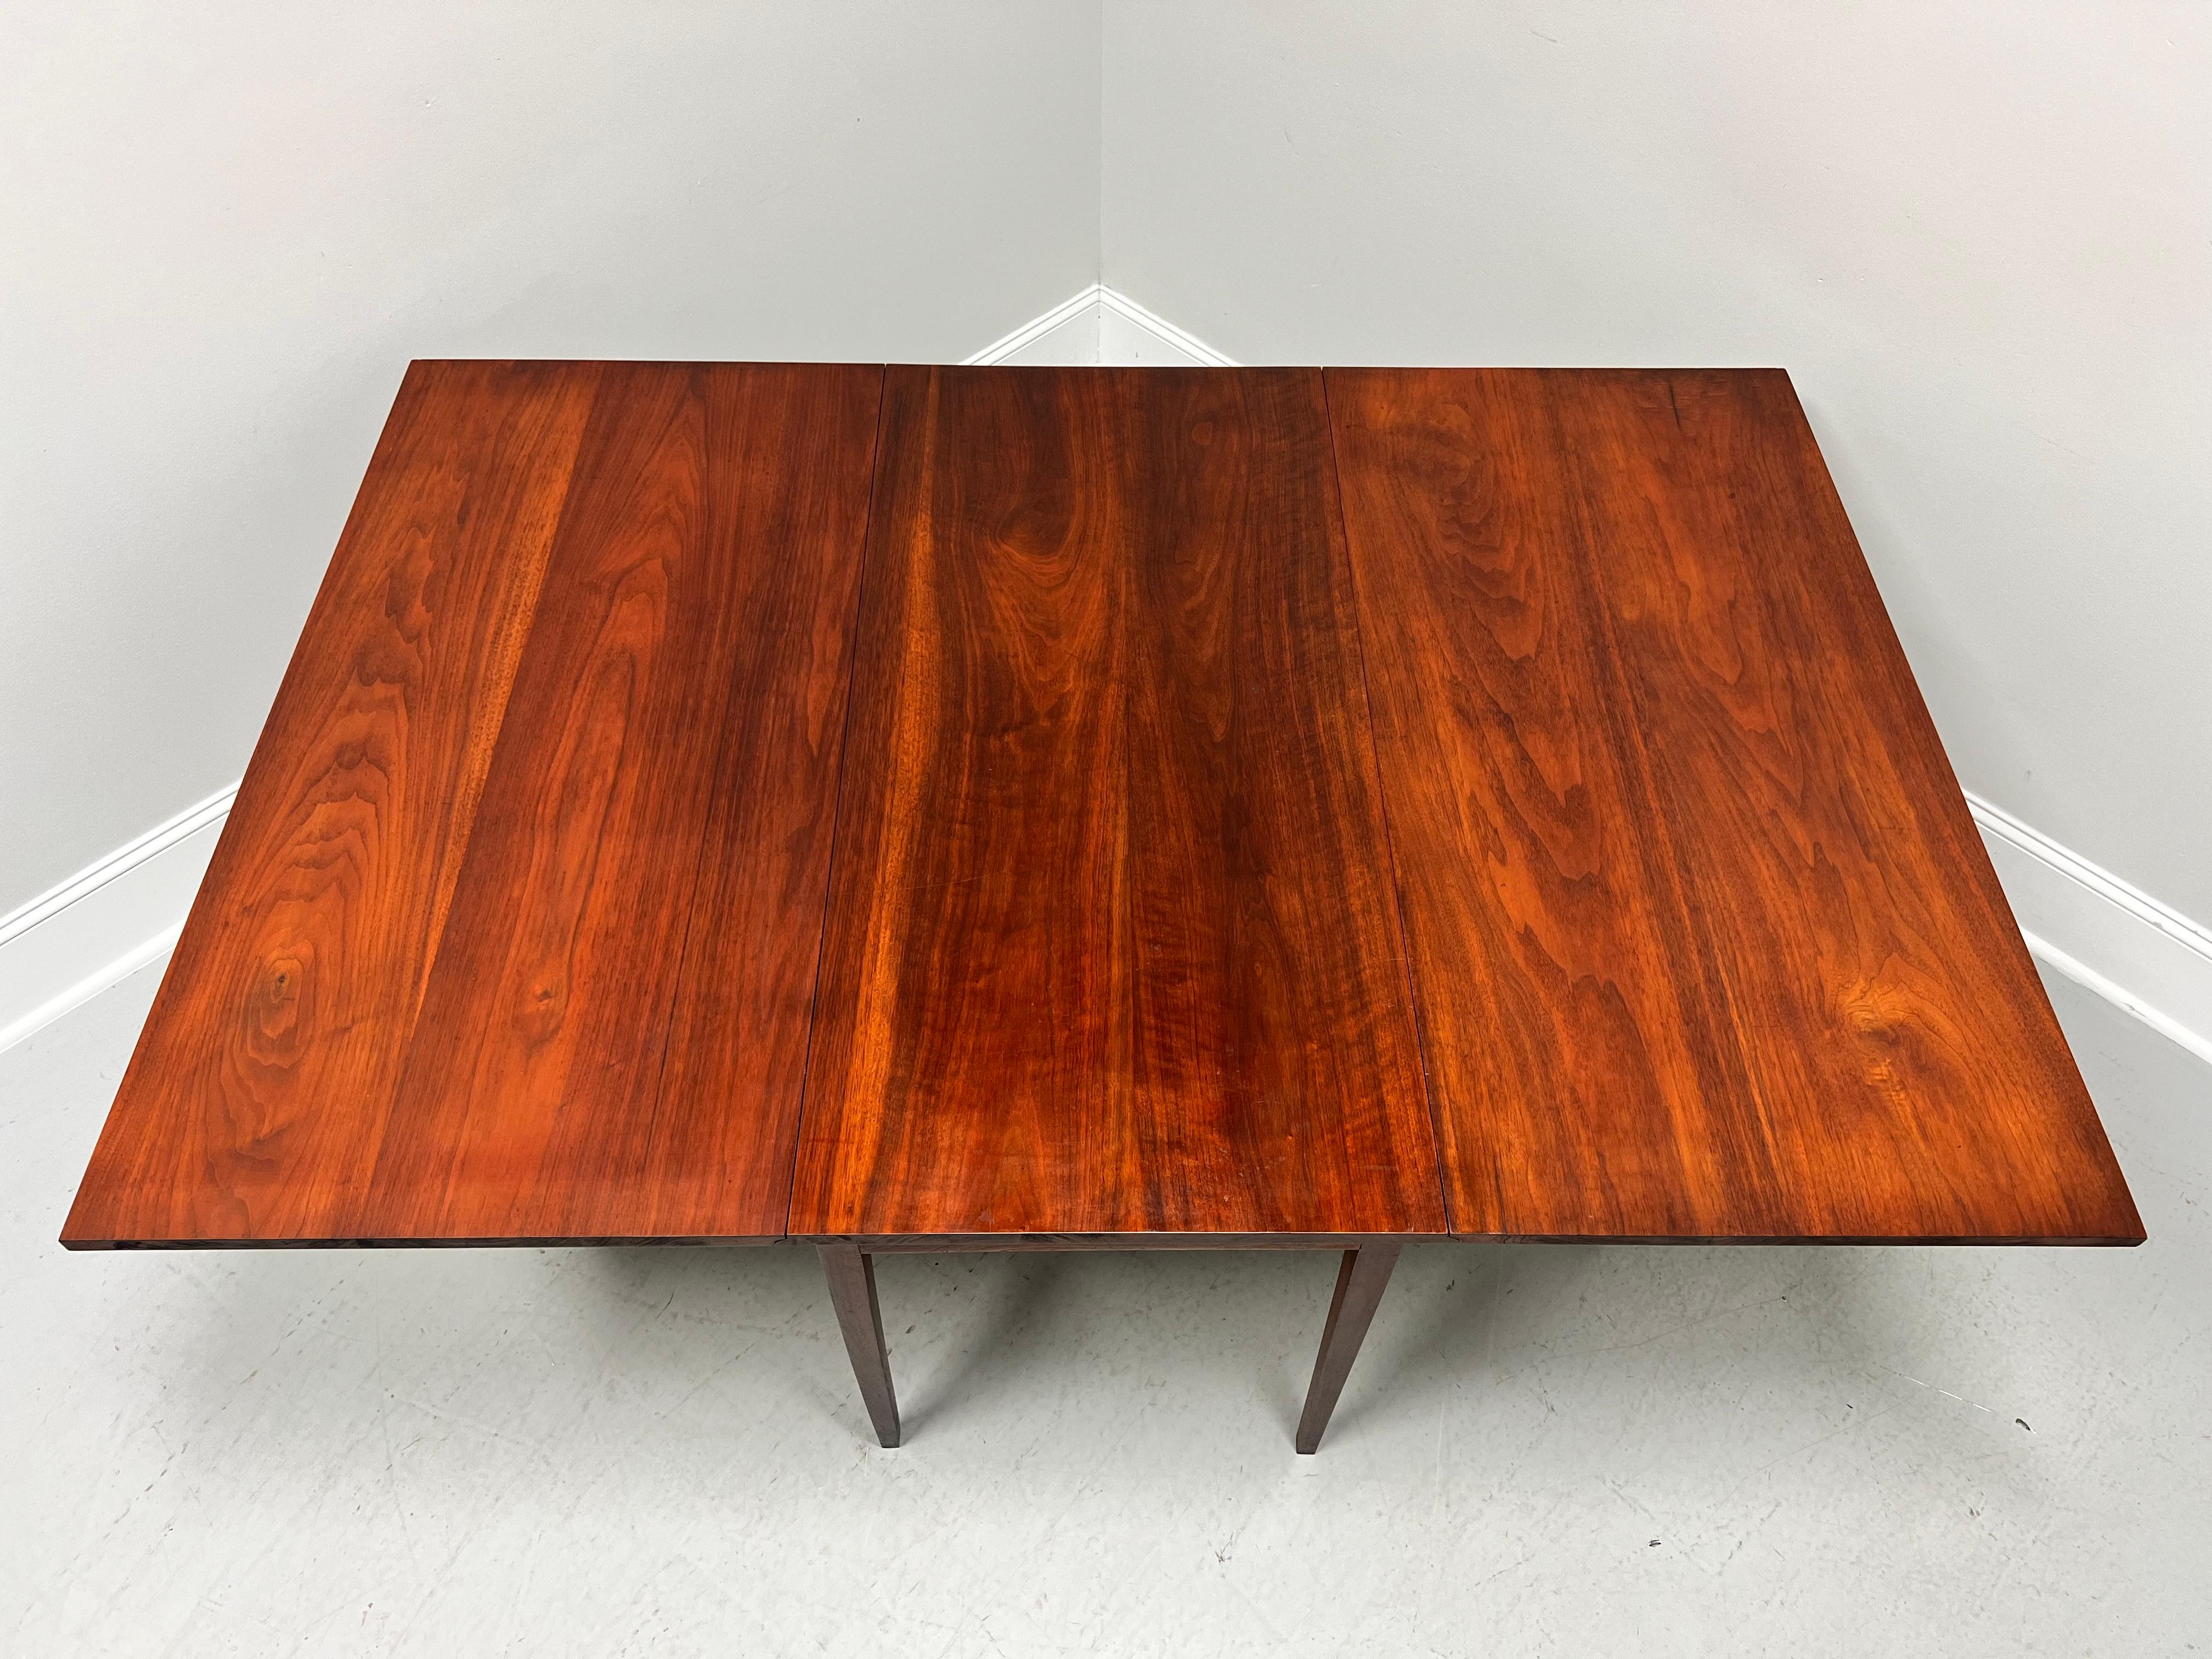 Antique Early 20th Century Walnut Hepplewhite Gateleg Drop-Leaf Dining Table For Sale 4